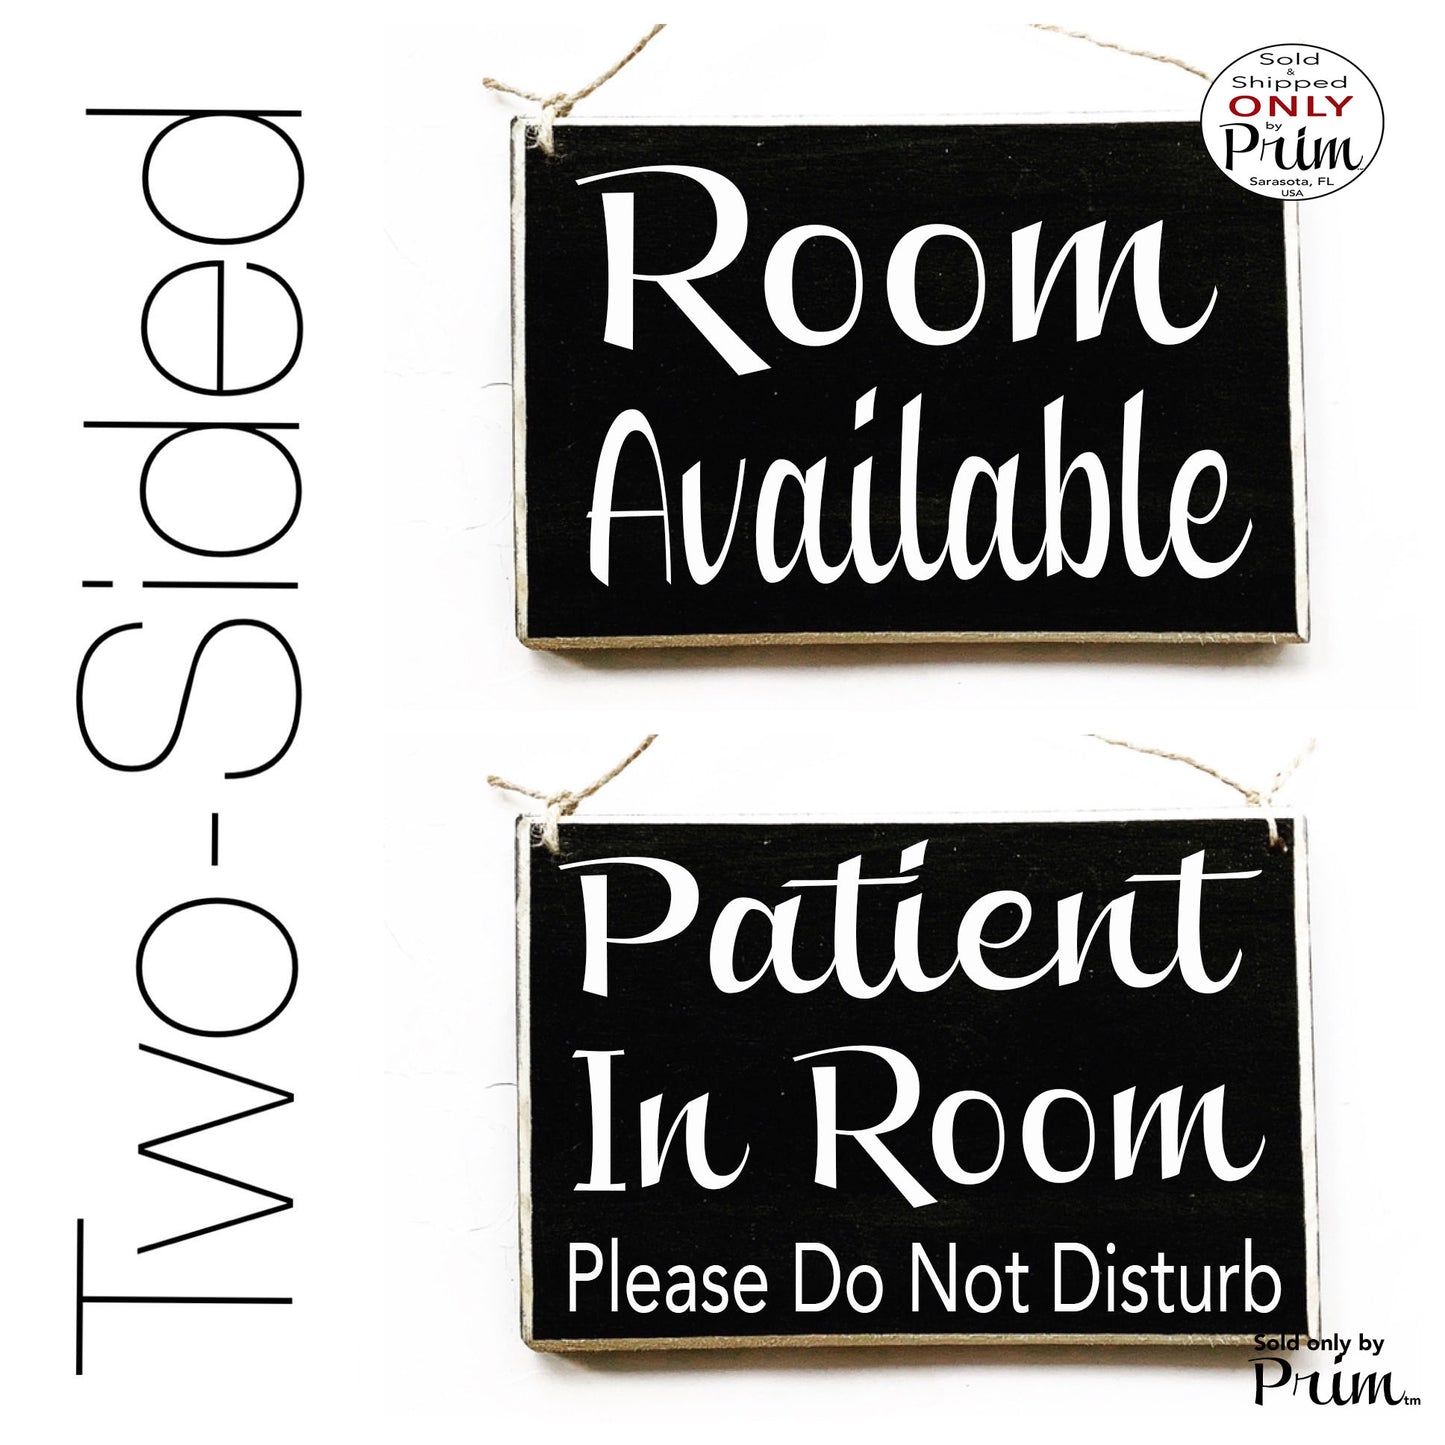 8x6 Room Available Patient In Room Please Do Not Disturb Custom Wood Sign Spa Salon Office Business No Entry Privacy In Session Door Plaque Designs by Prim